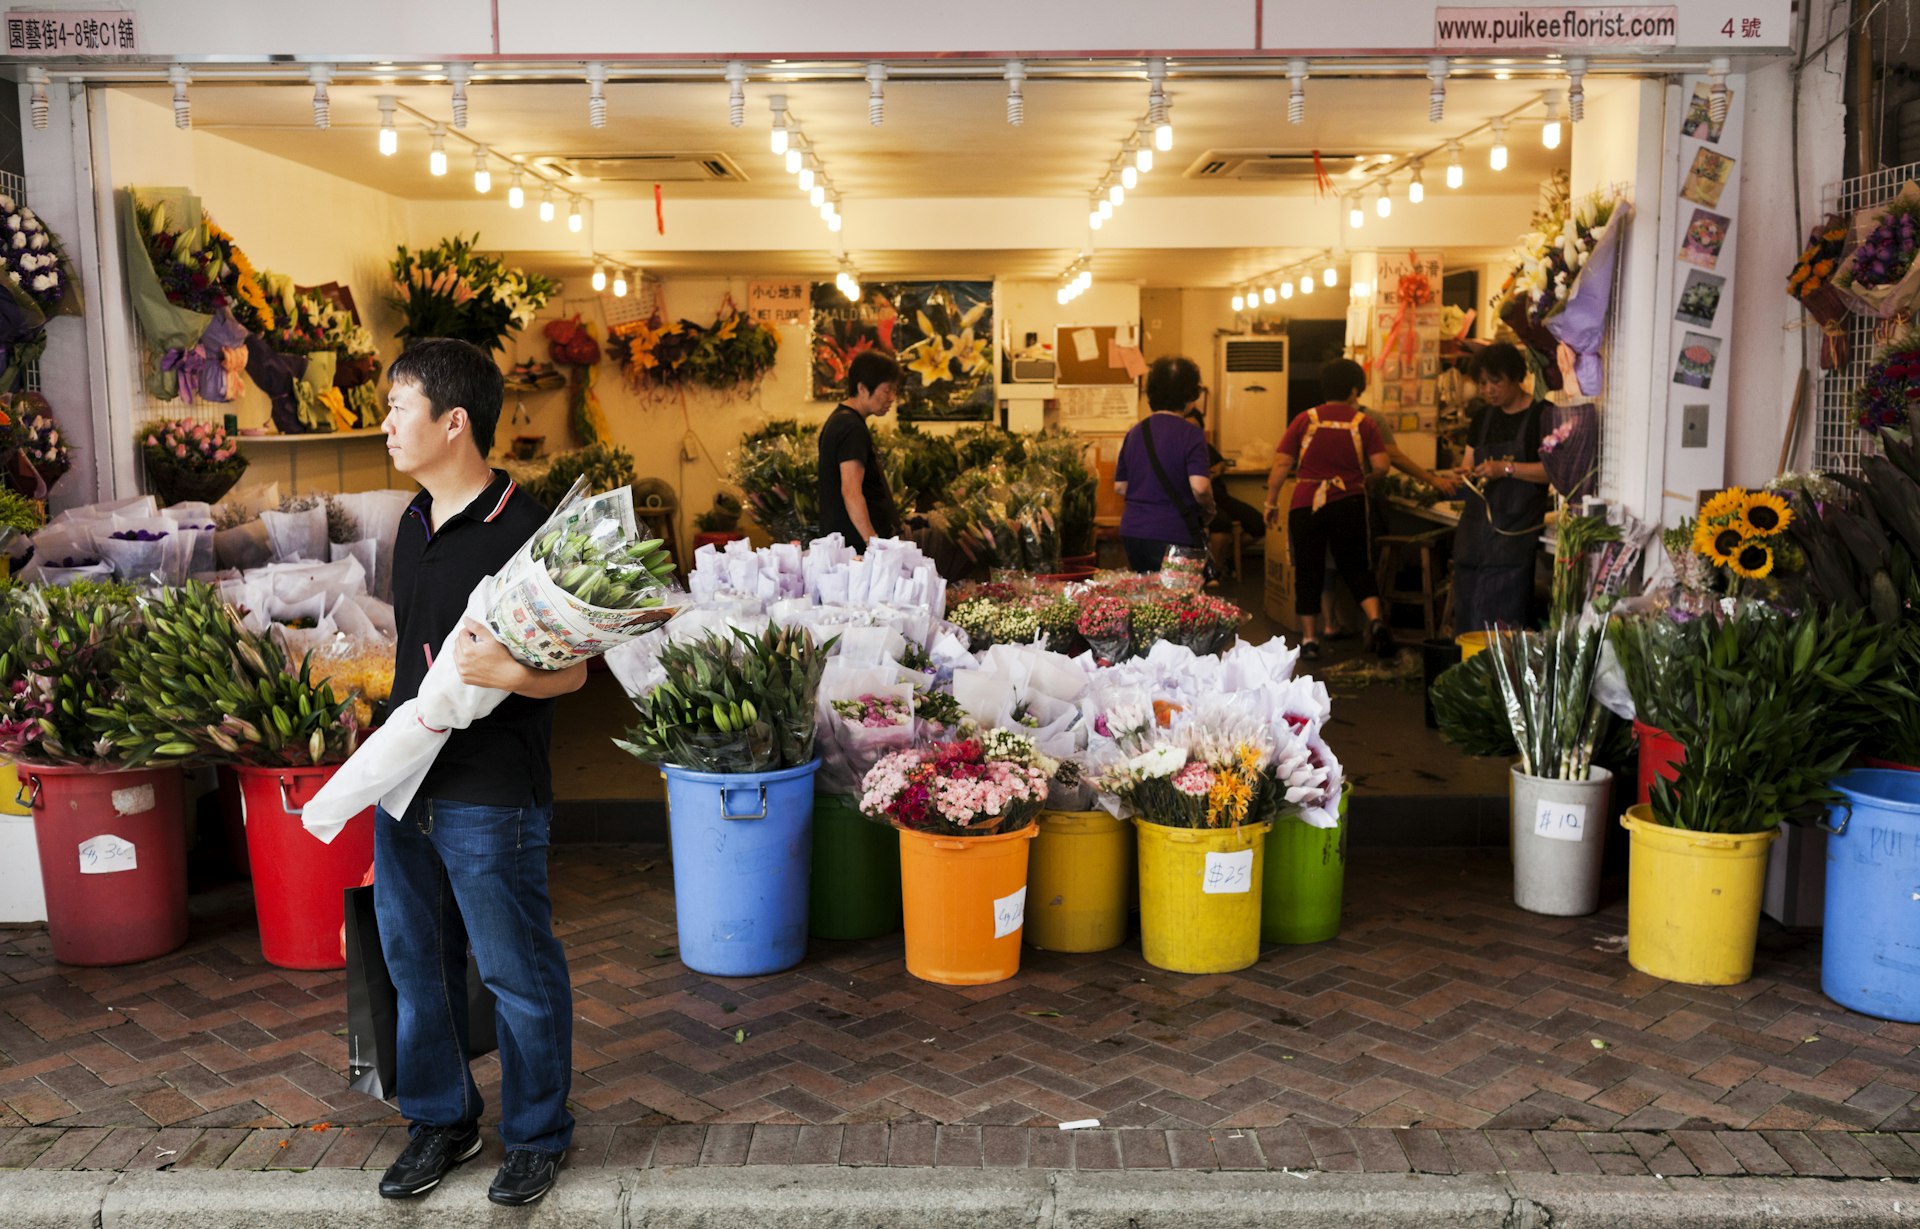  Man waiting on the street with a flower bouquet while people are shopping inside a flower shop